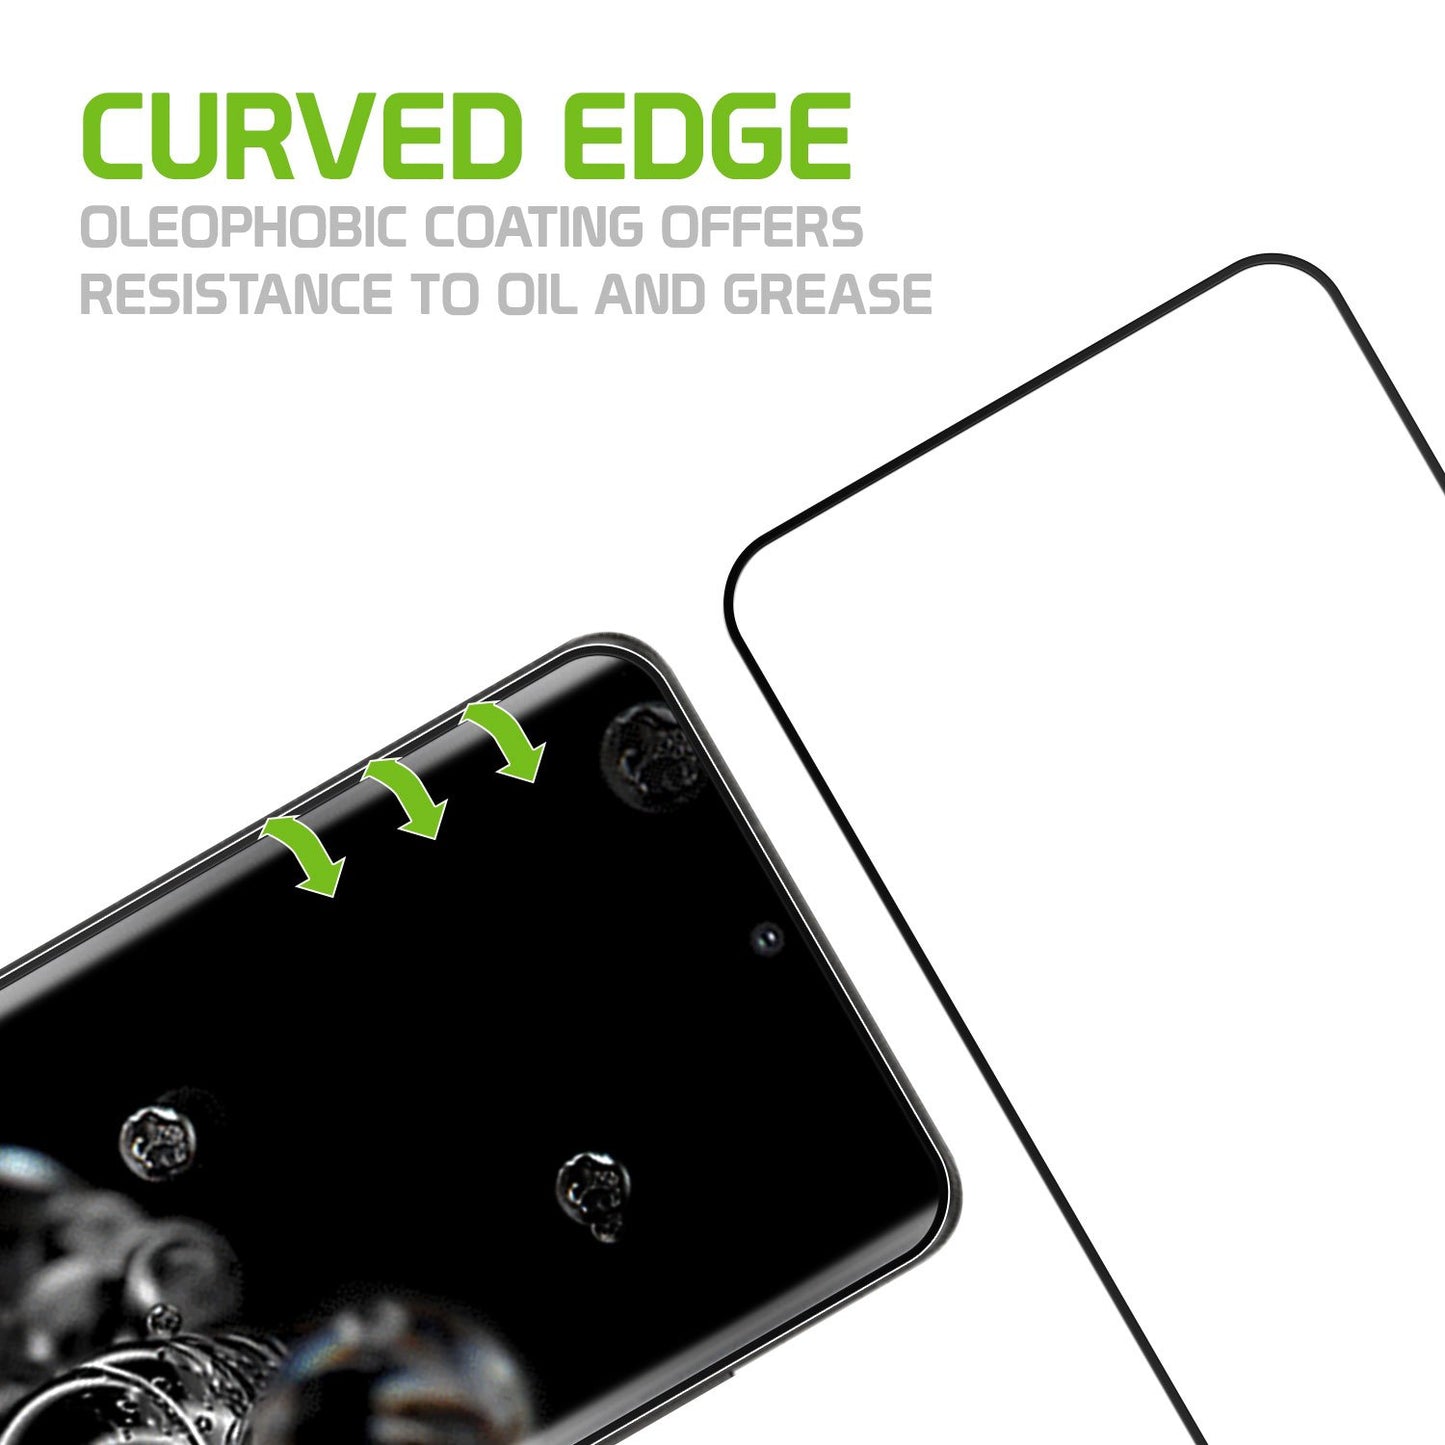 SGSAMS20UF - Premium Ultra-Thin Tempered Glass Screen Protector for Samsung Galaxy S20 Ultra (0.3mm) by Cellet